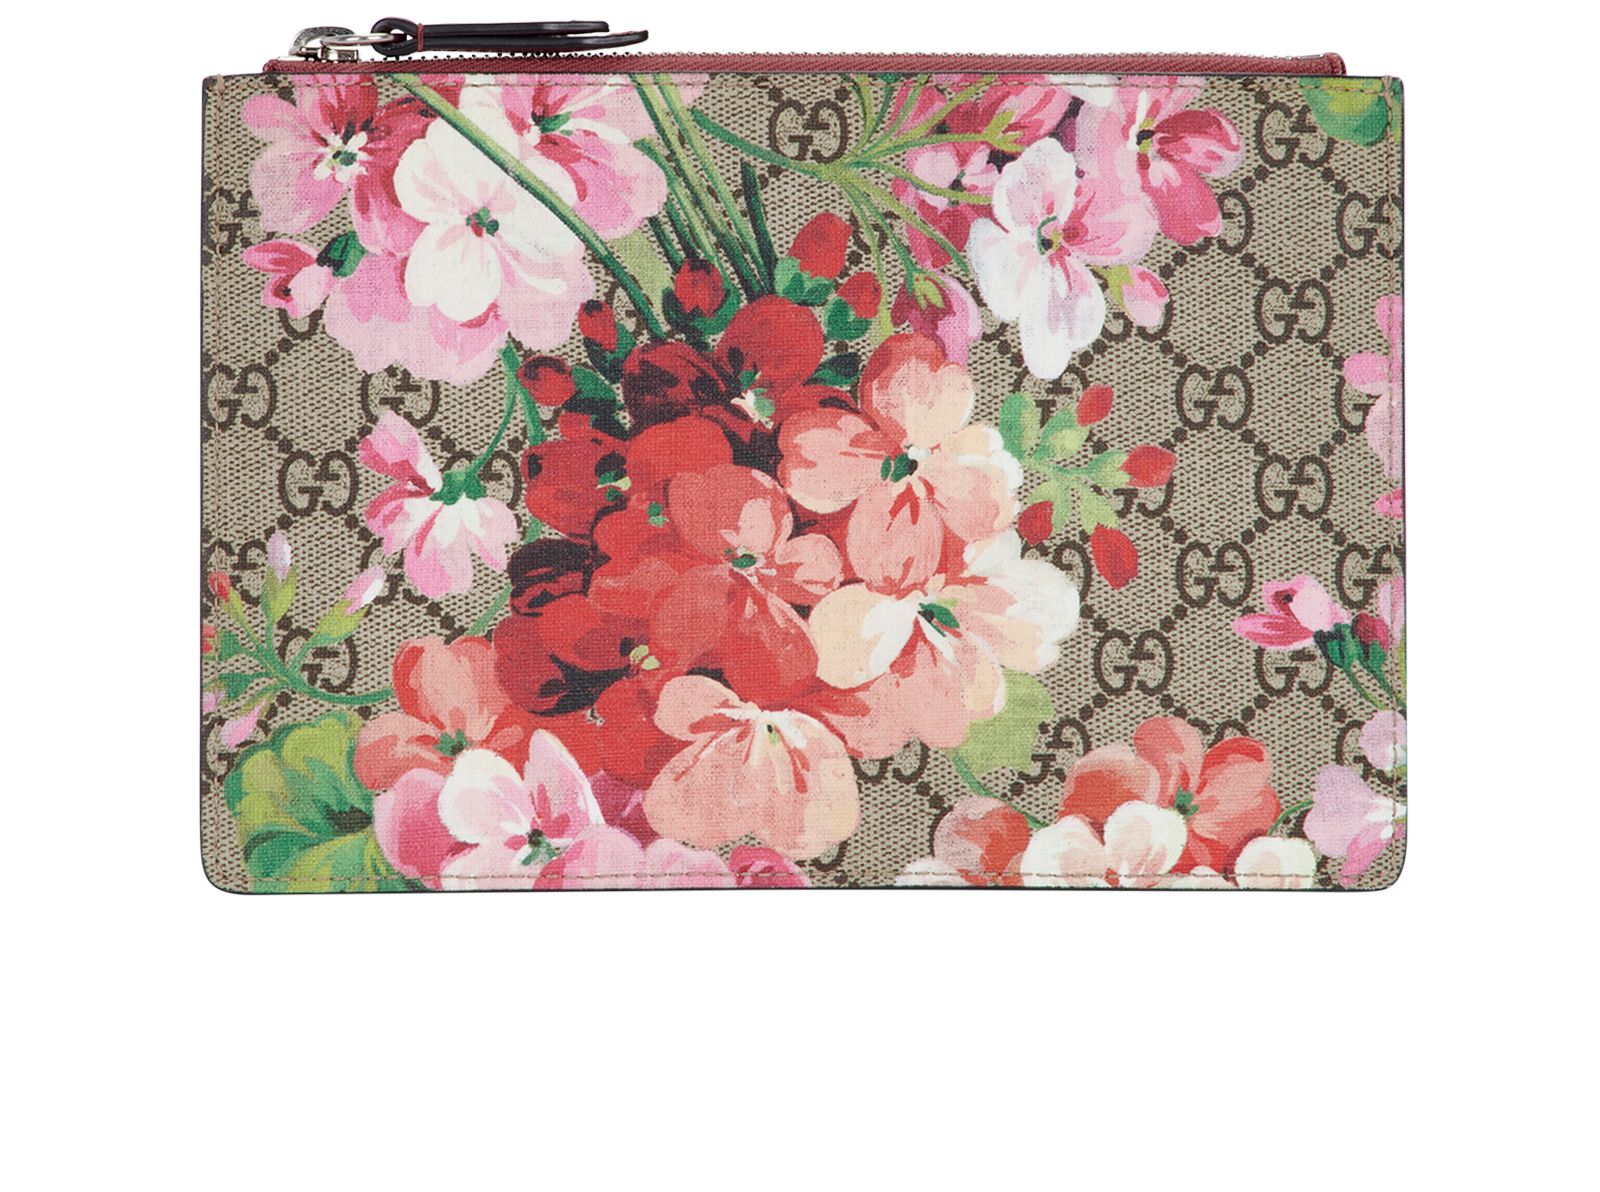 Gucci bloom clutch $1299 with authentication, Bags